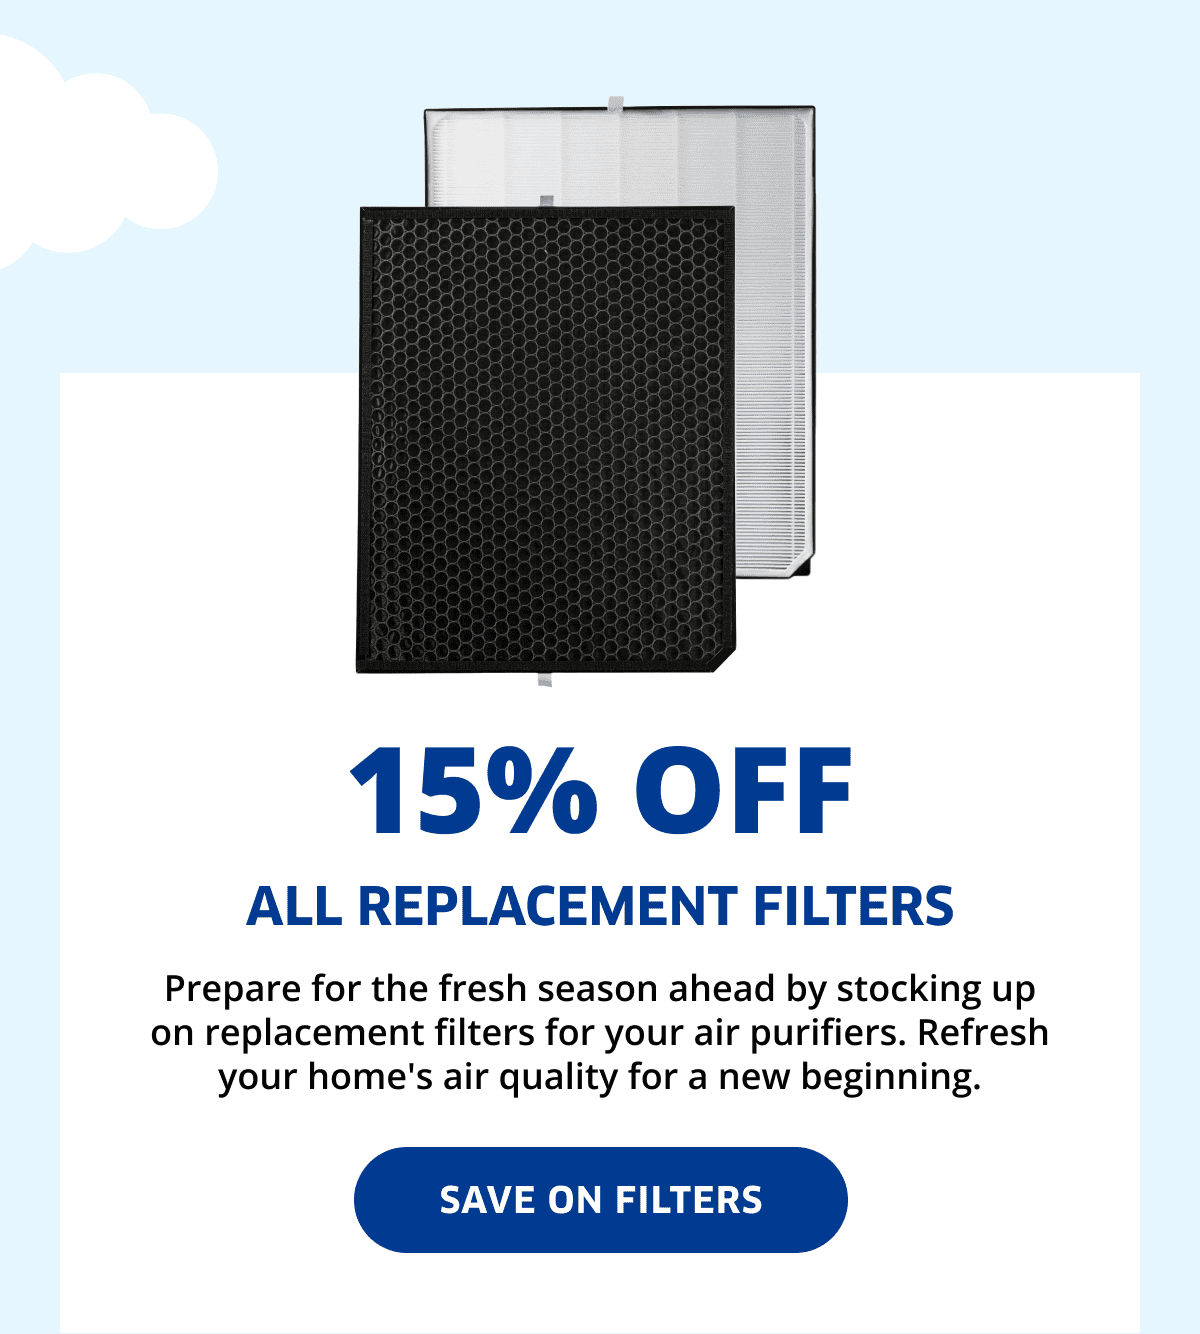 Save On Filters